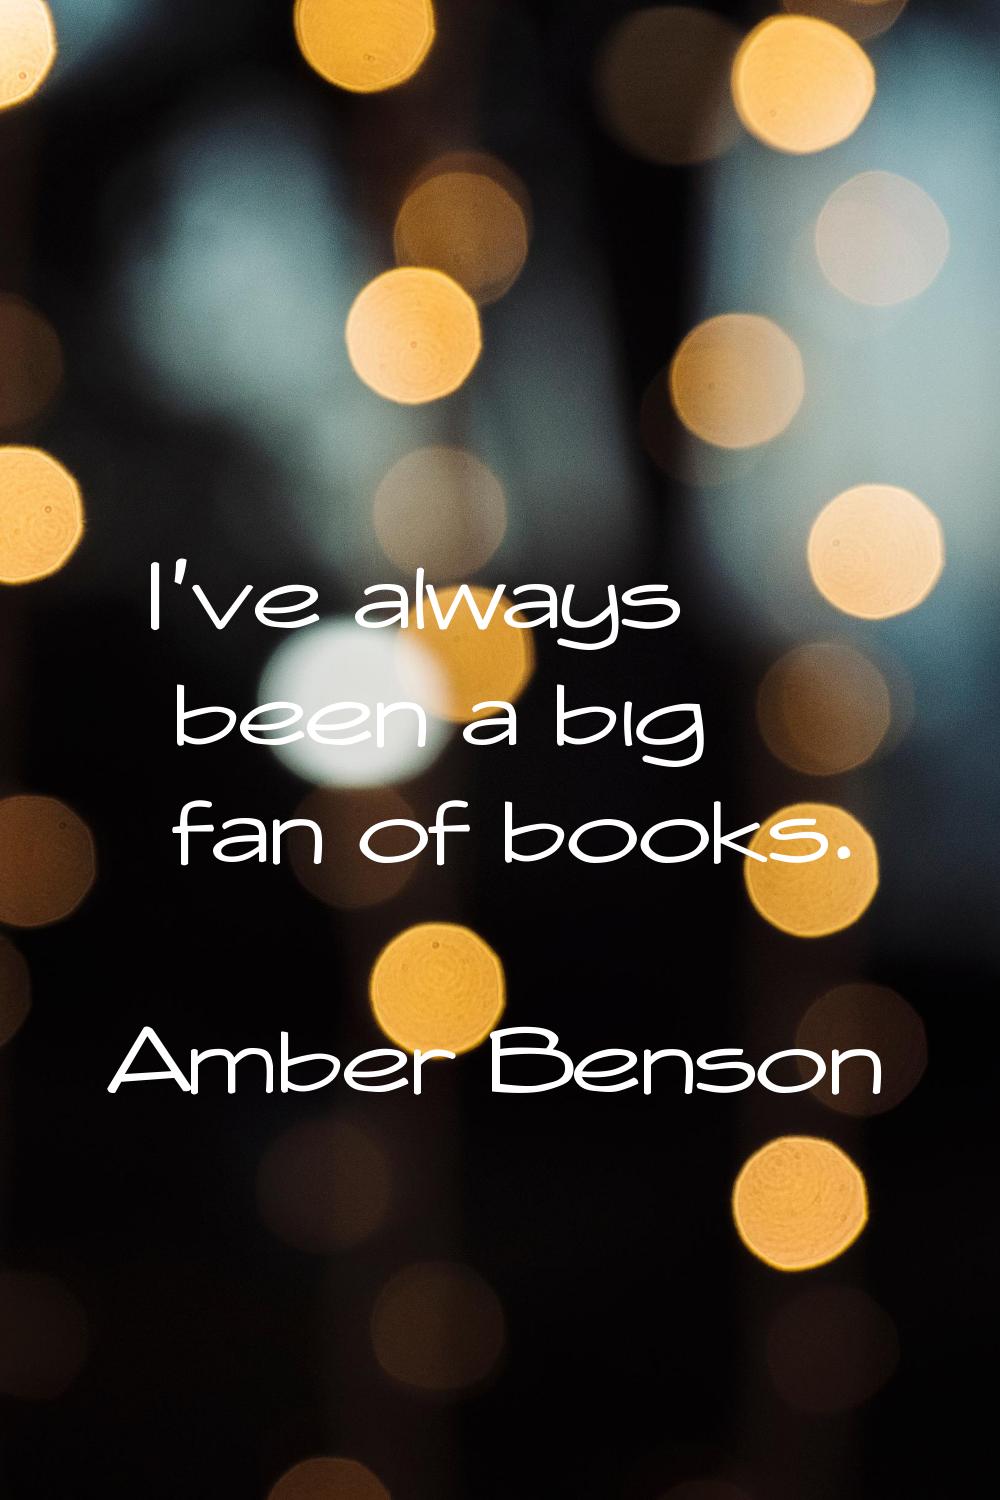 I've always been a big fan of books.